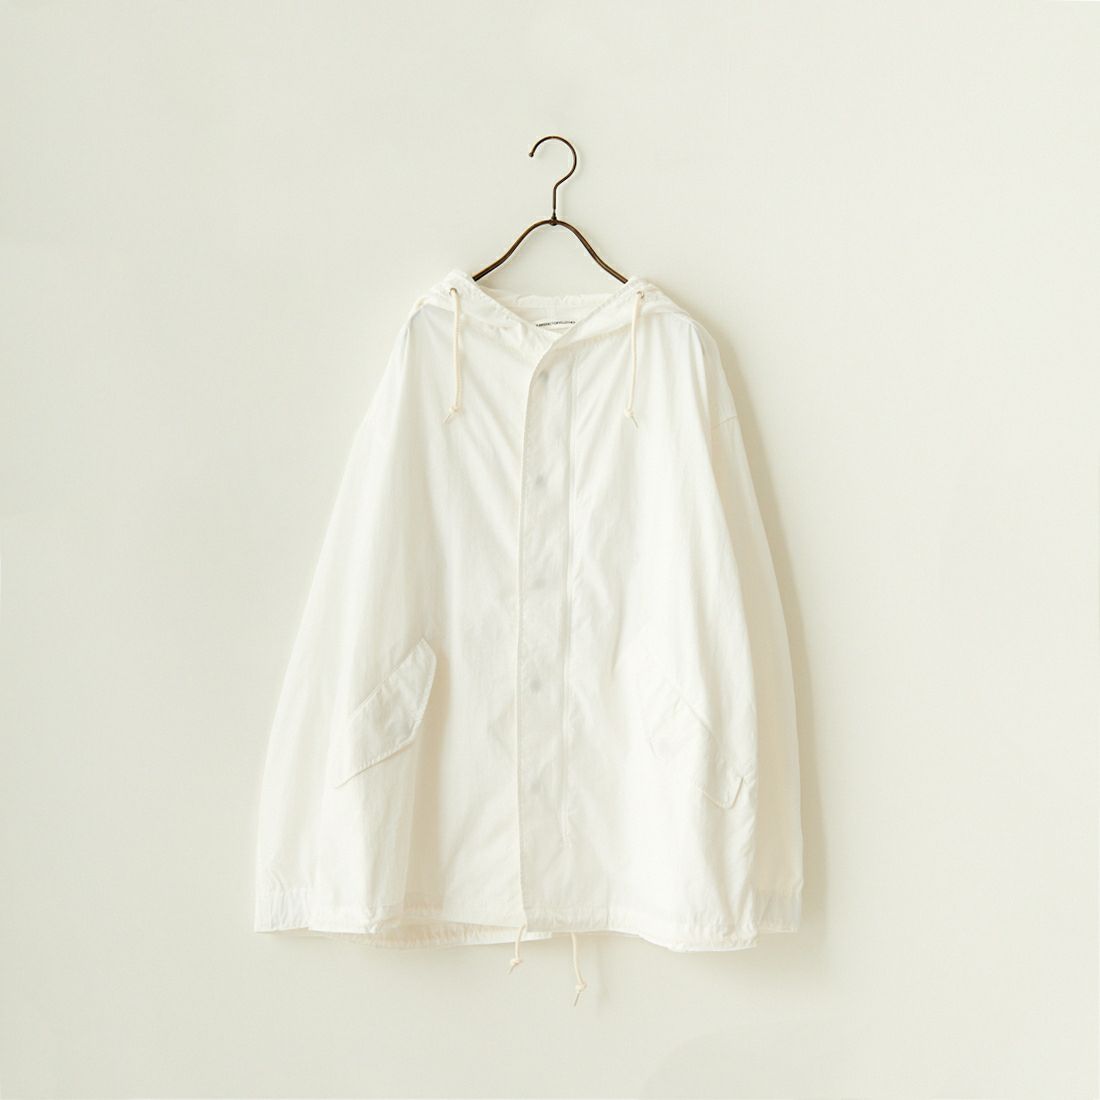 Jeans Factory Clothes [ジーンズファクトリークローズ] ショート丈 ナイロンモッズパーカー [IN1-CT-4] WHITE